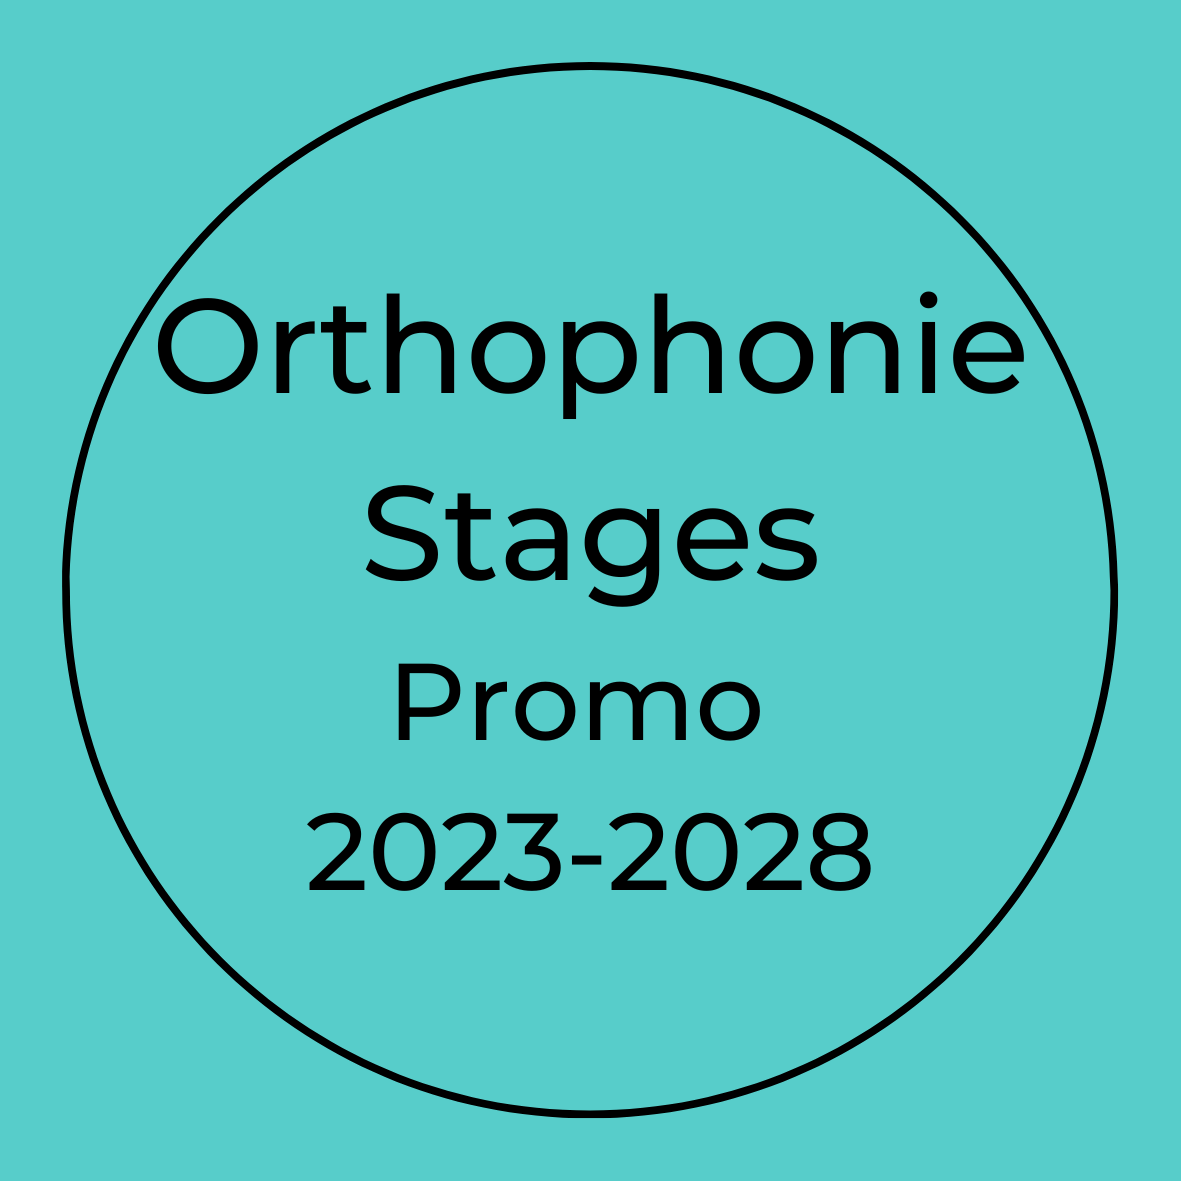 Orthophonie Stages Promo 2023-2028